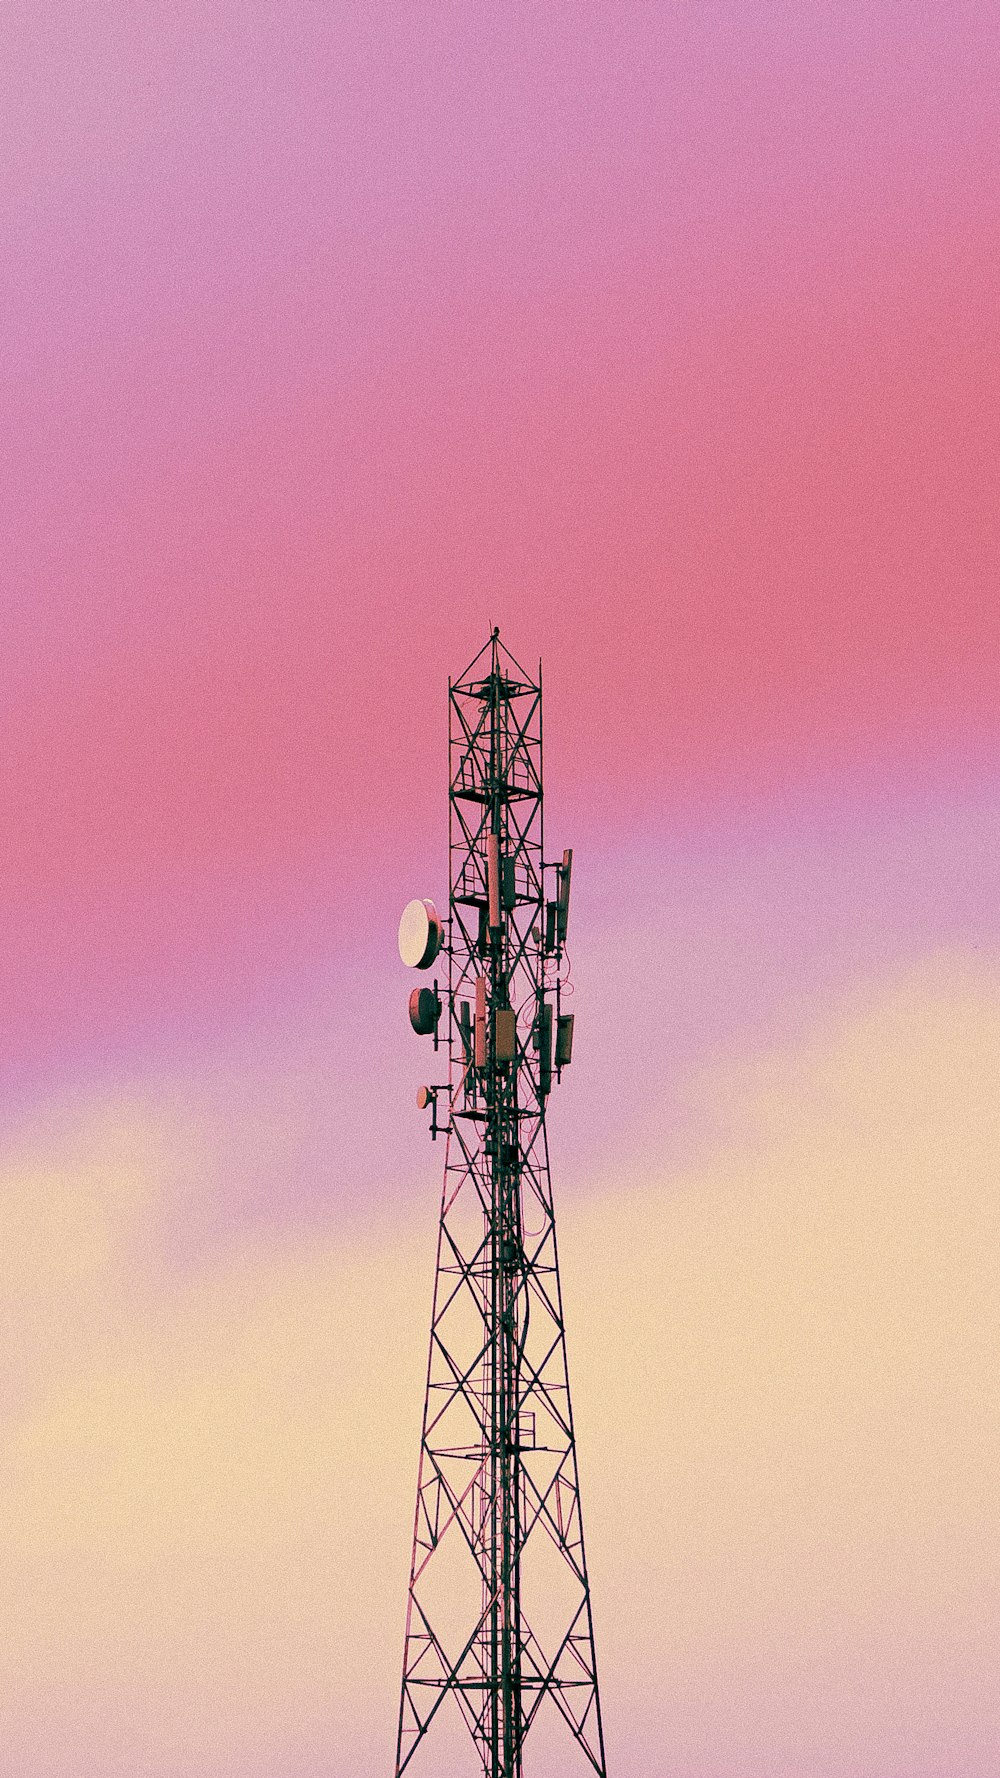 a cell phone tower with a pink sky in the background